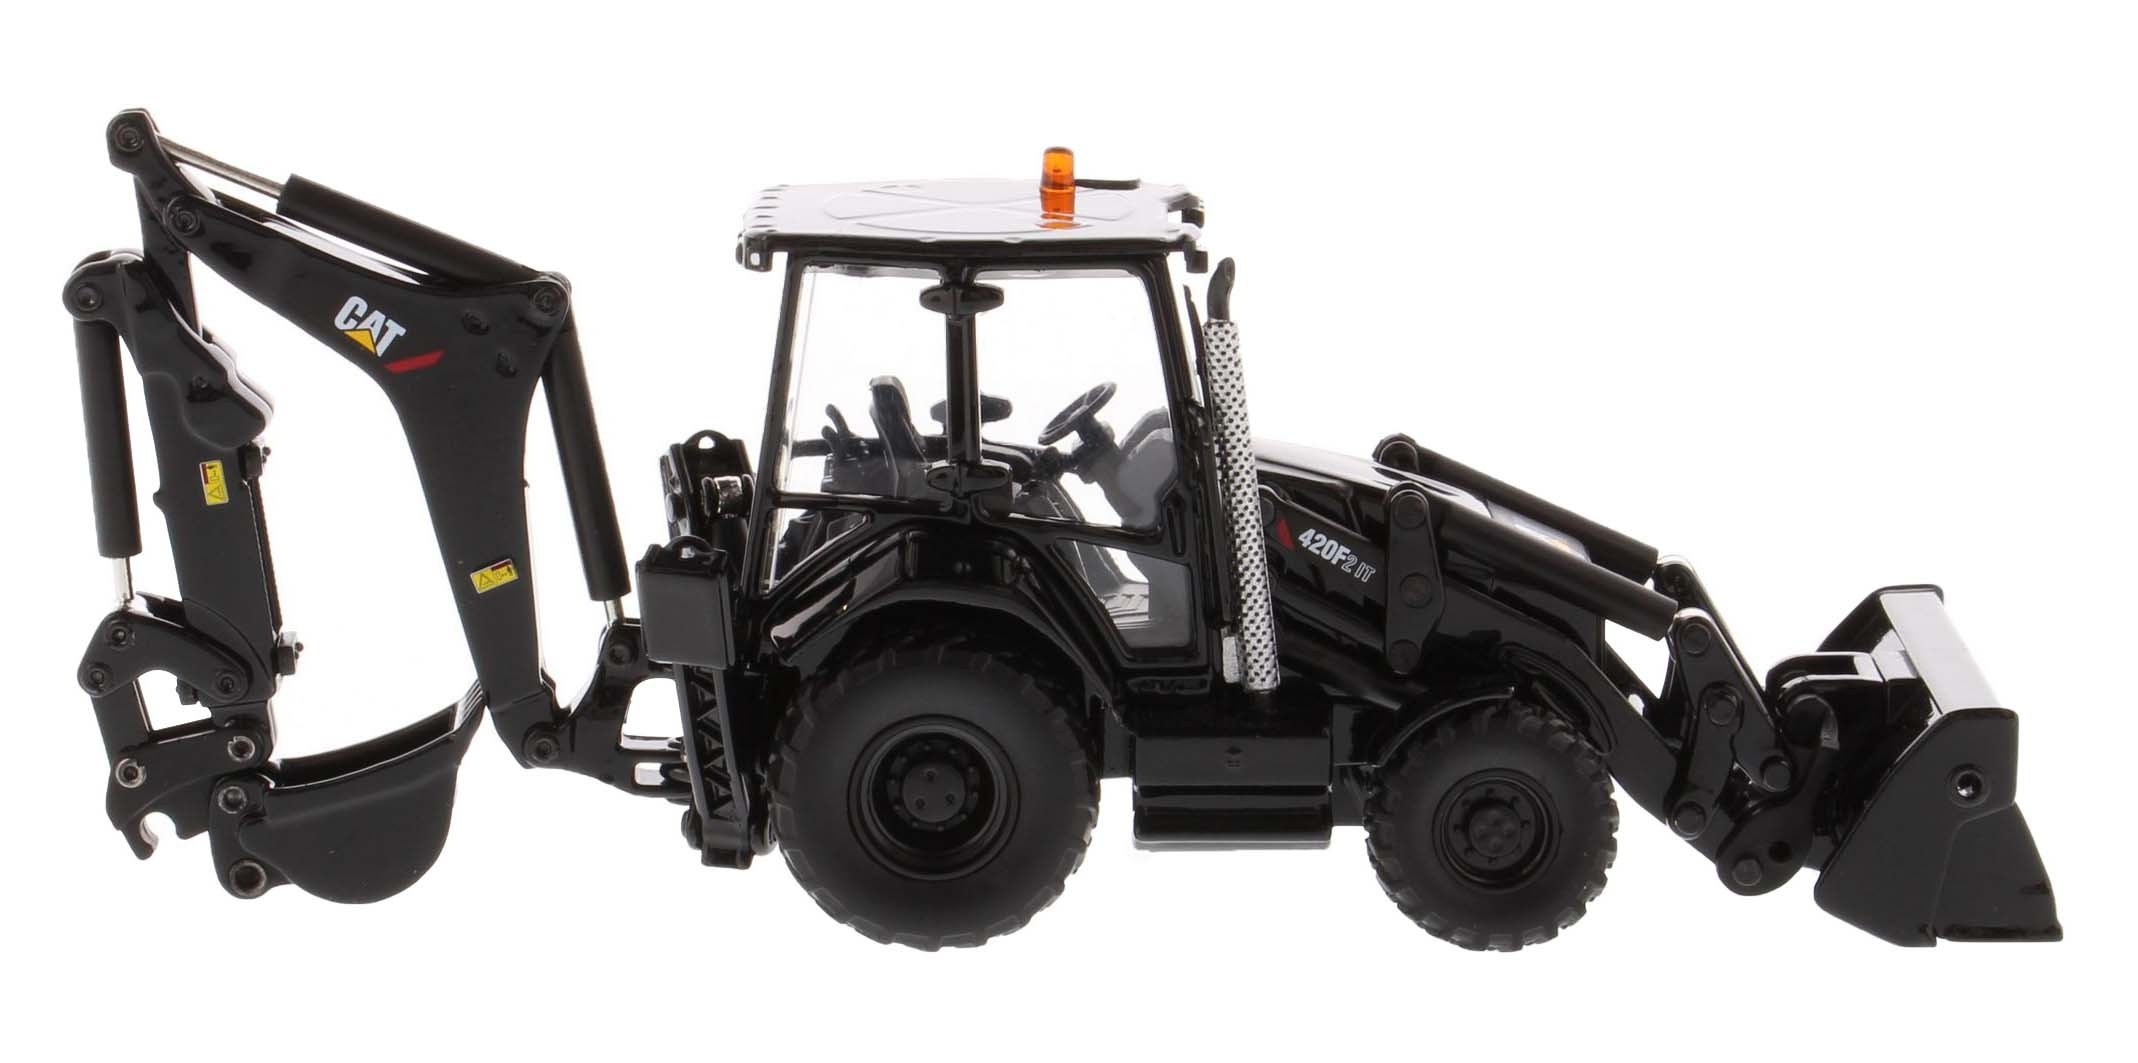 Cat 420F2 IT Backhoe Loader - 30th Anniversary edition, Special Black Finish